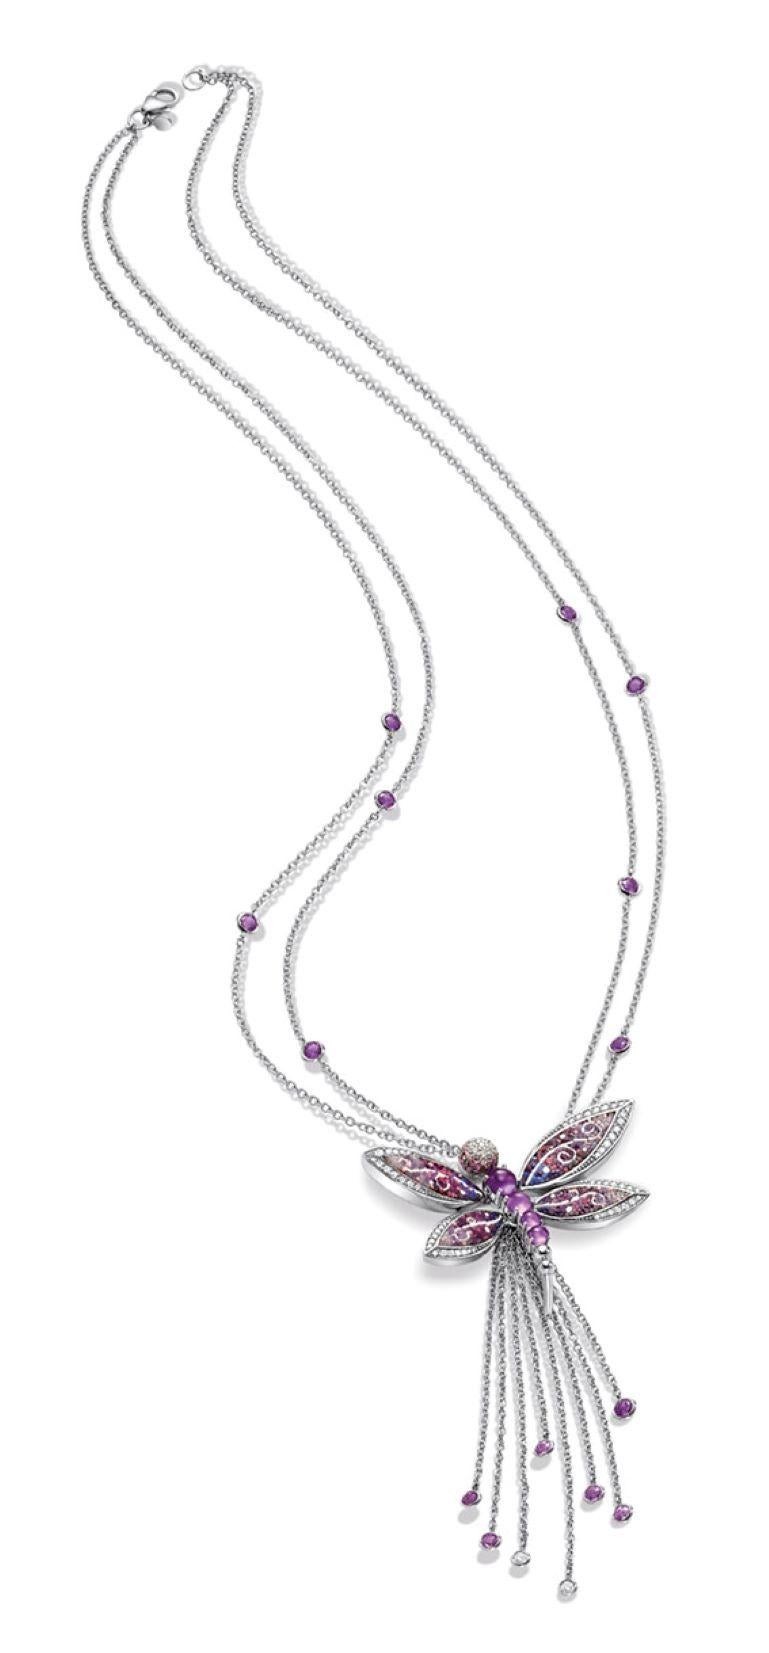 Brilliant Cut Necklace White Gold White Diamonds Sapphires Amethyst Hand Decorated MicroMosaic For Sale